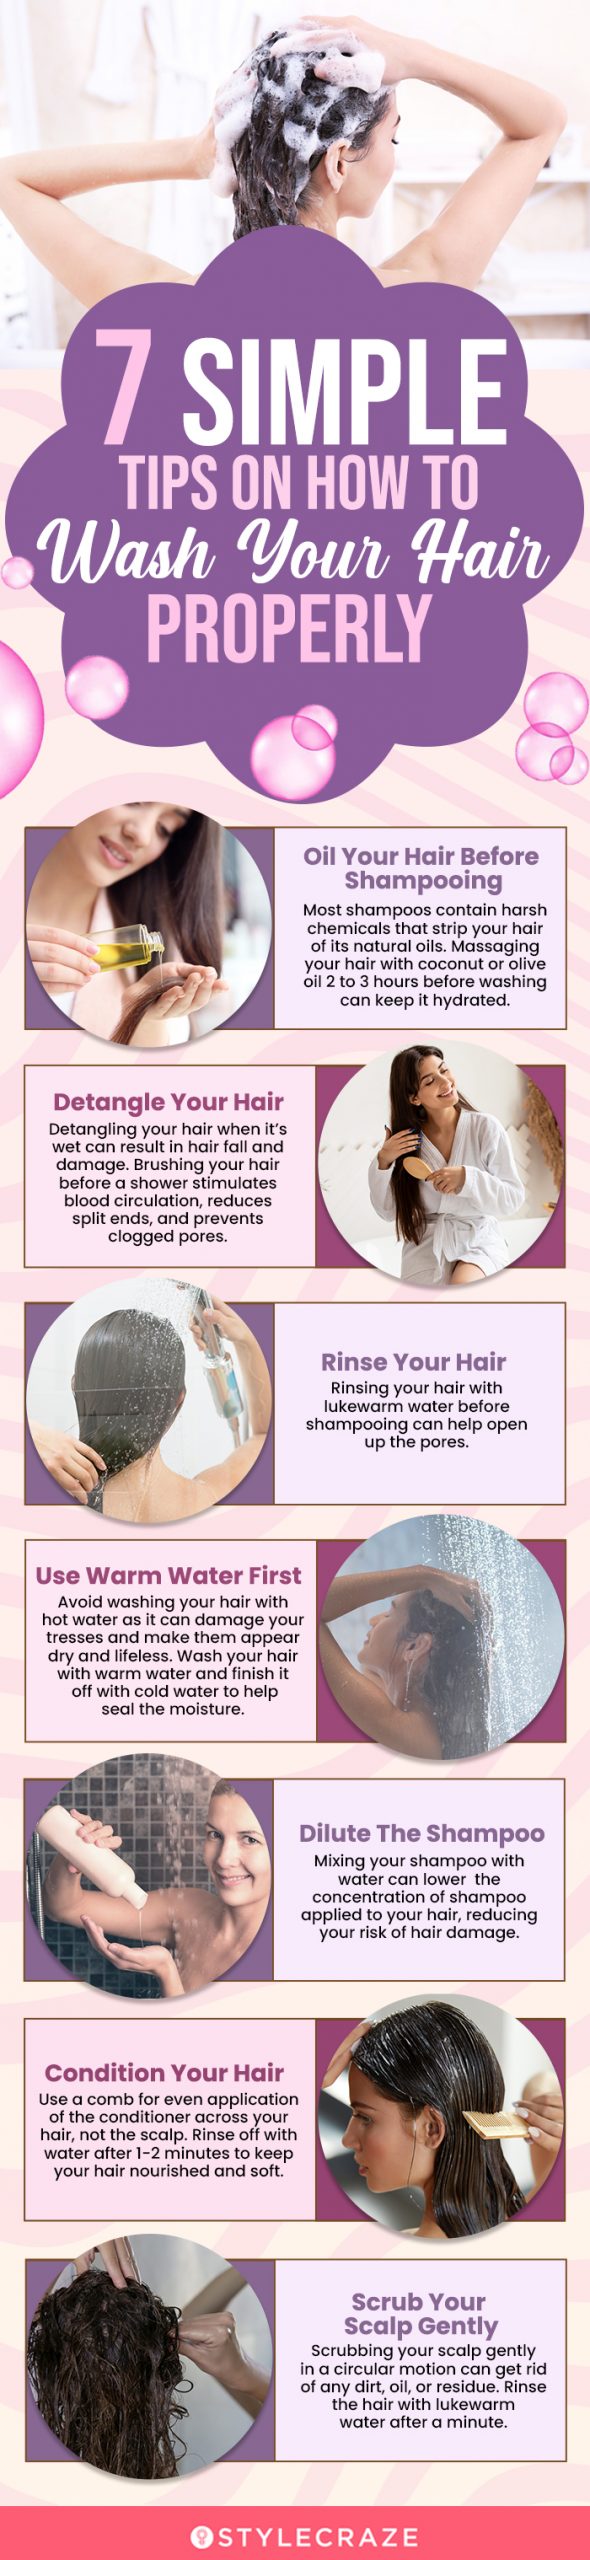 Best Hair Wash Tips To Wash Your Hair The Right Way – Our Top 10 Tips